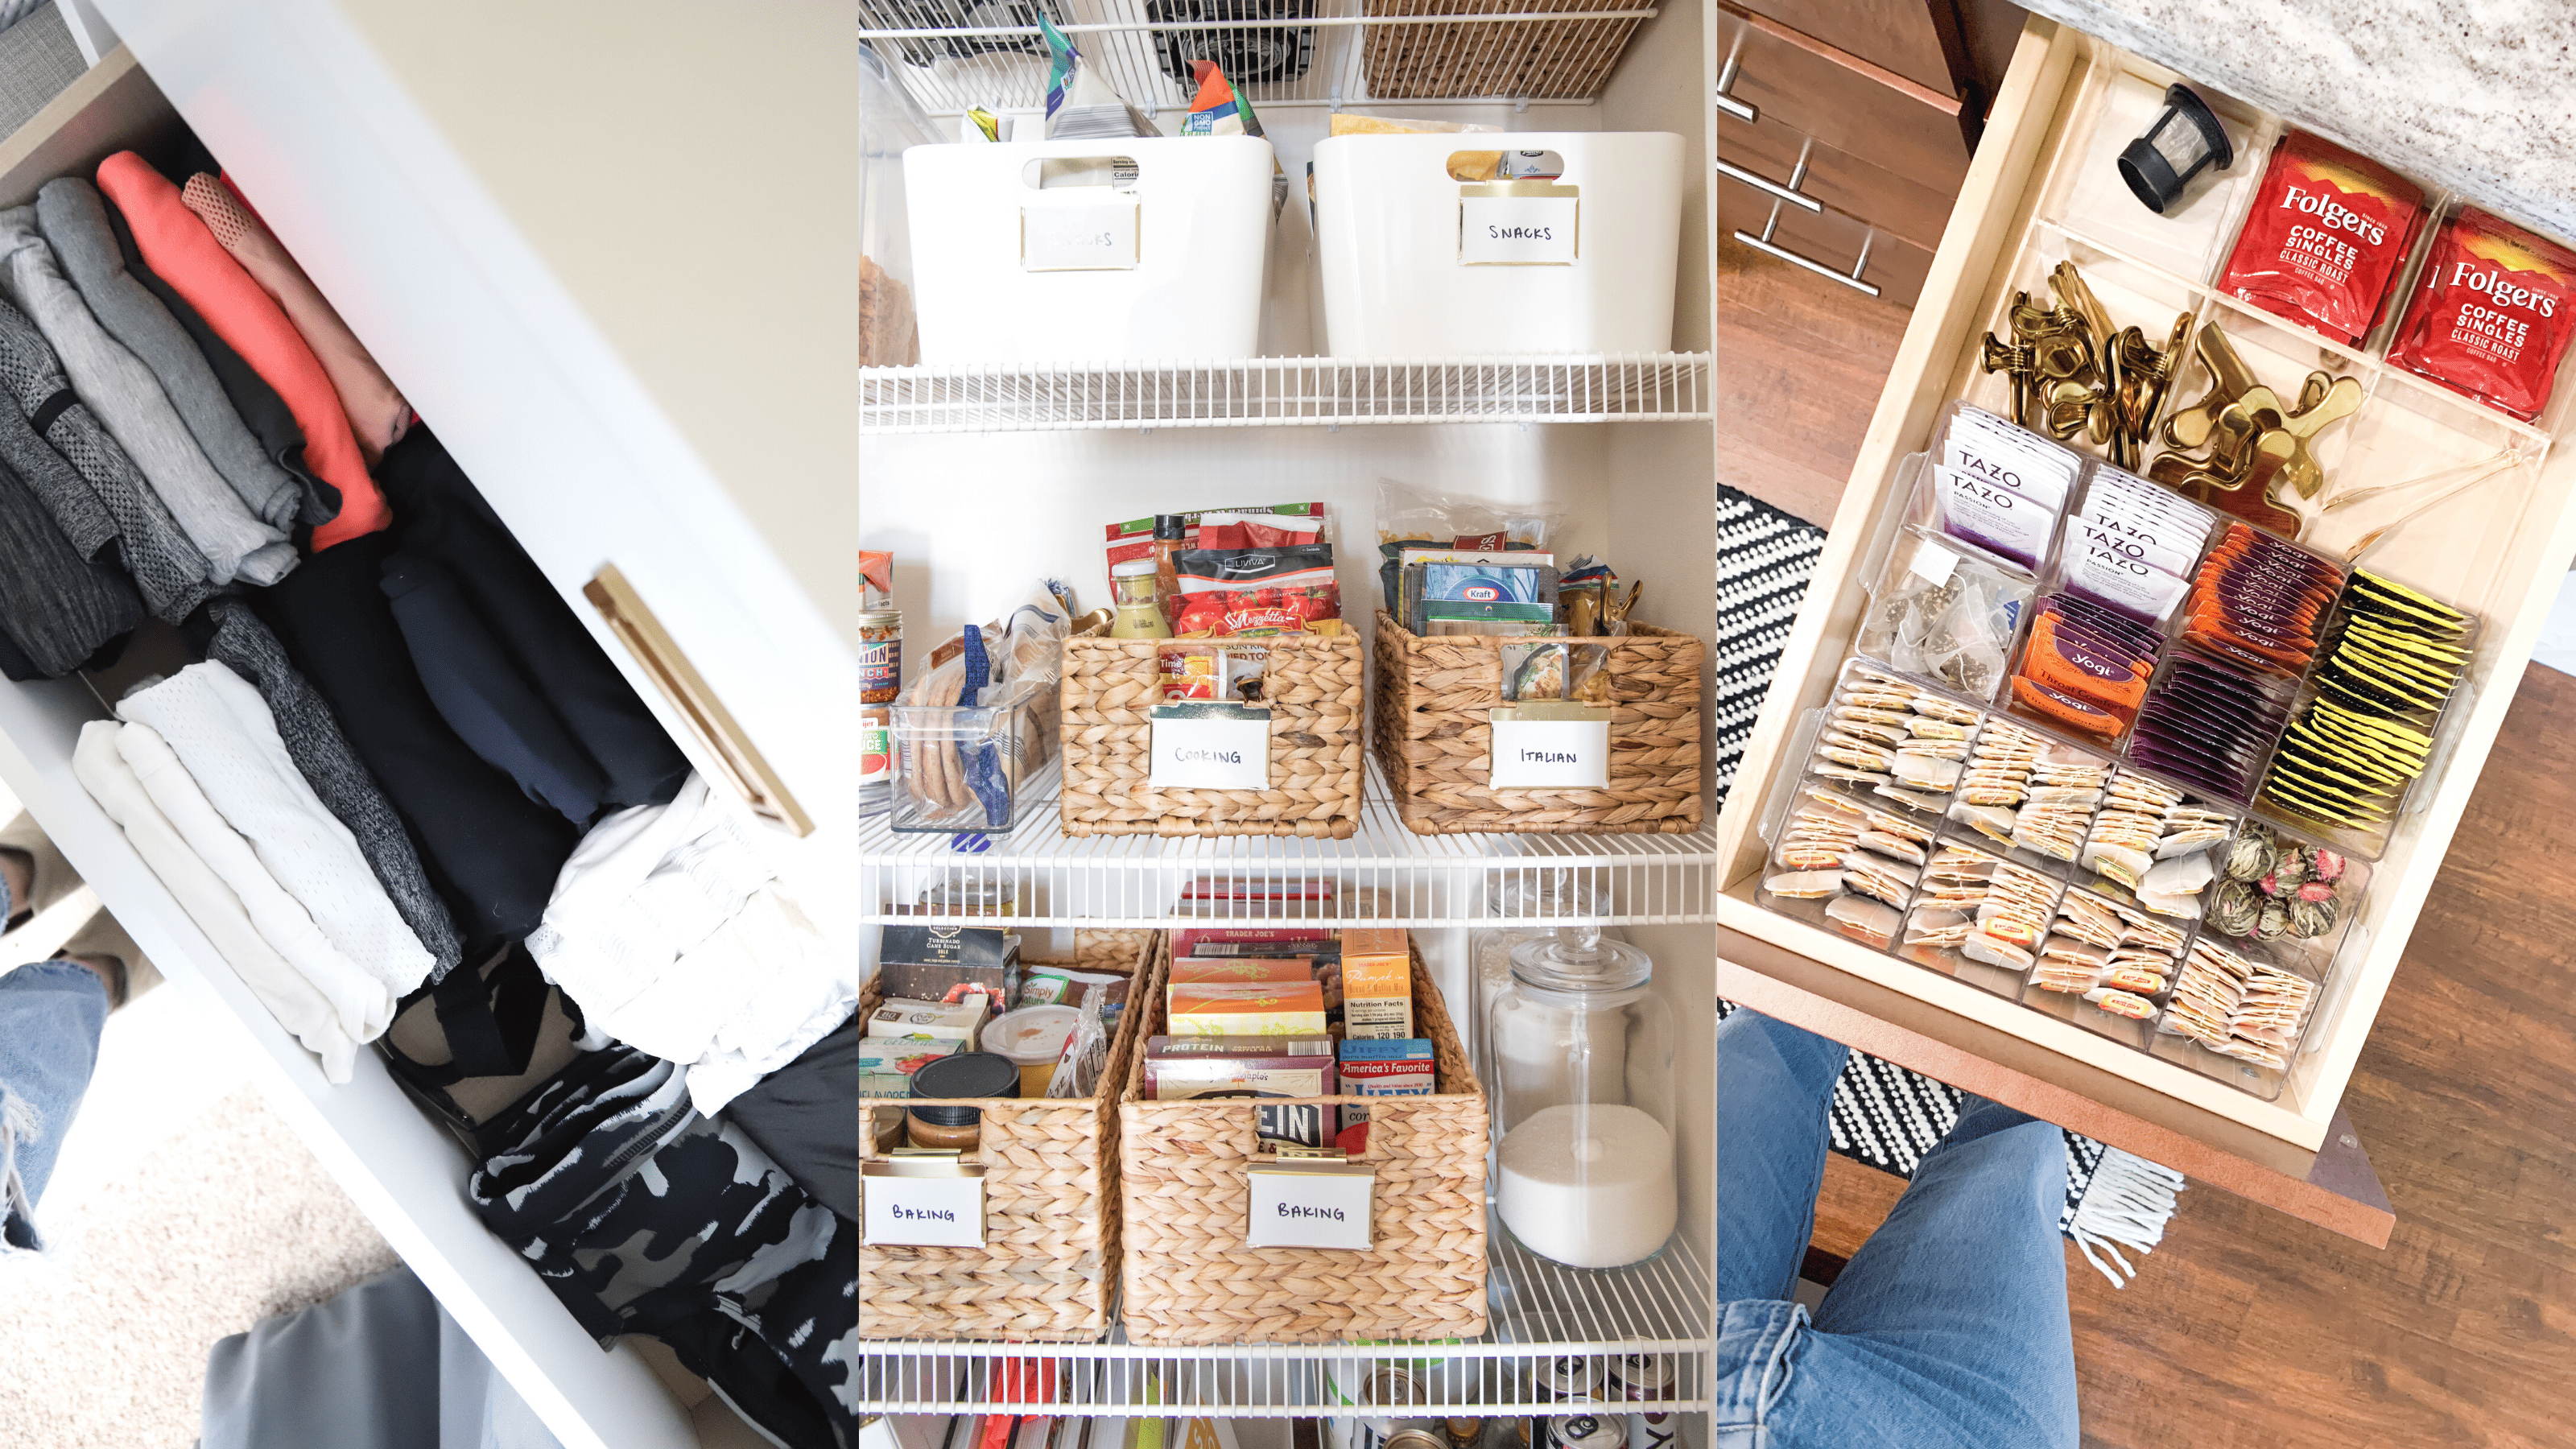 Get Your Home Insanely Tidy With These 18 Storage Organization